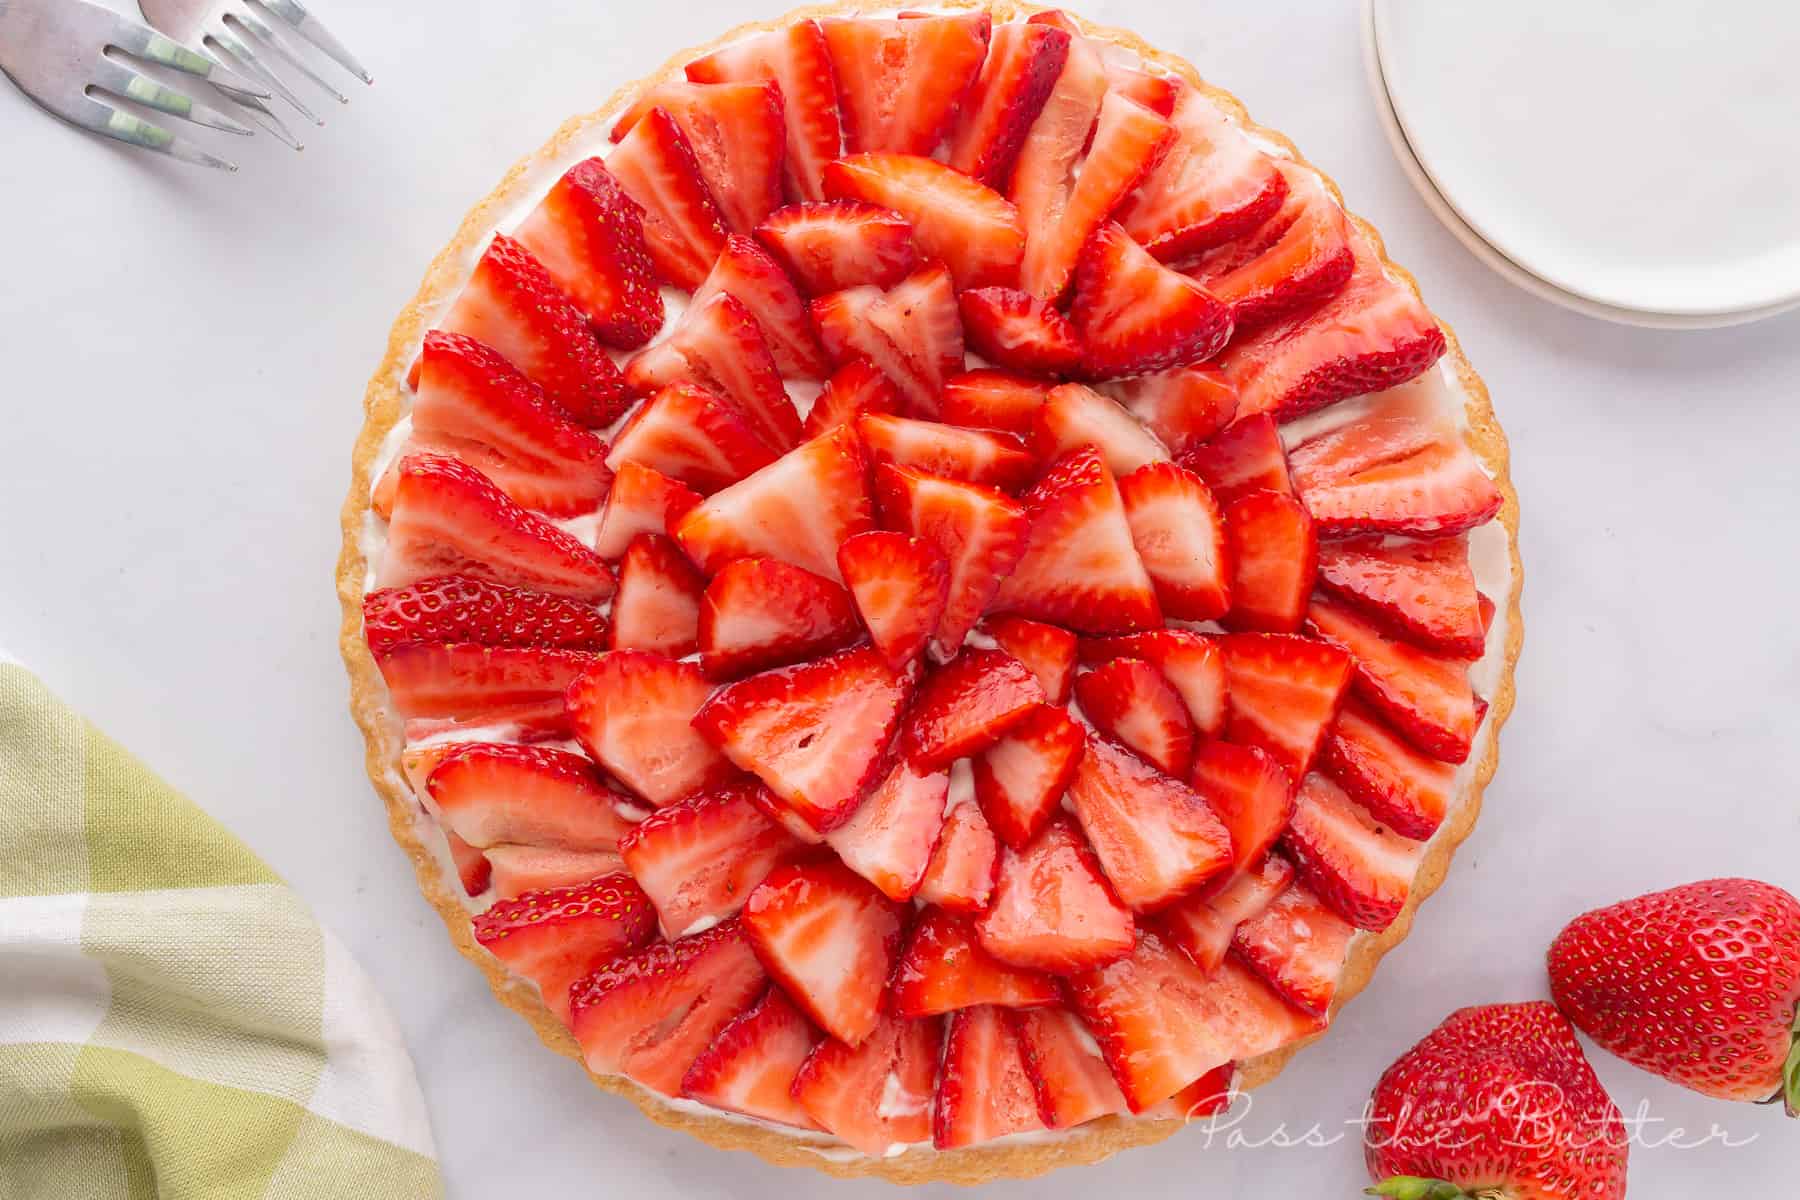 Strawberry flan on counter with fresh strawberries and plates